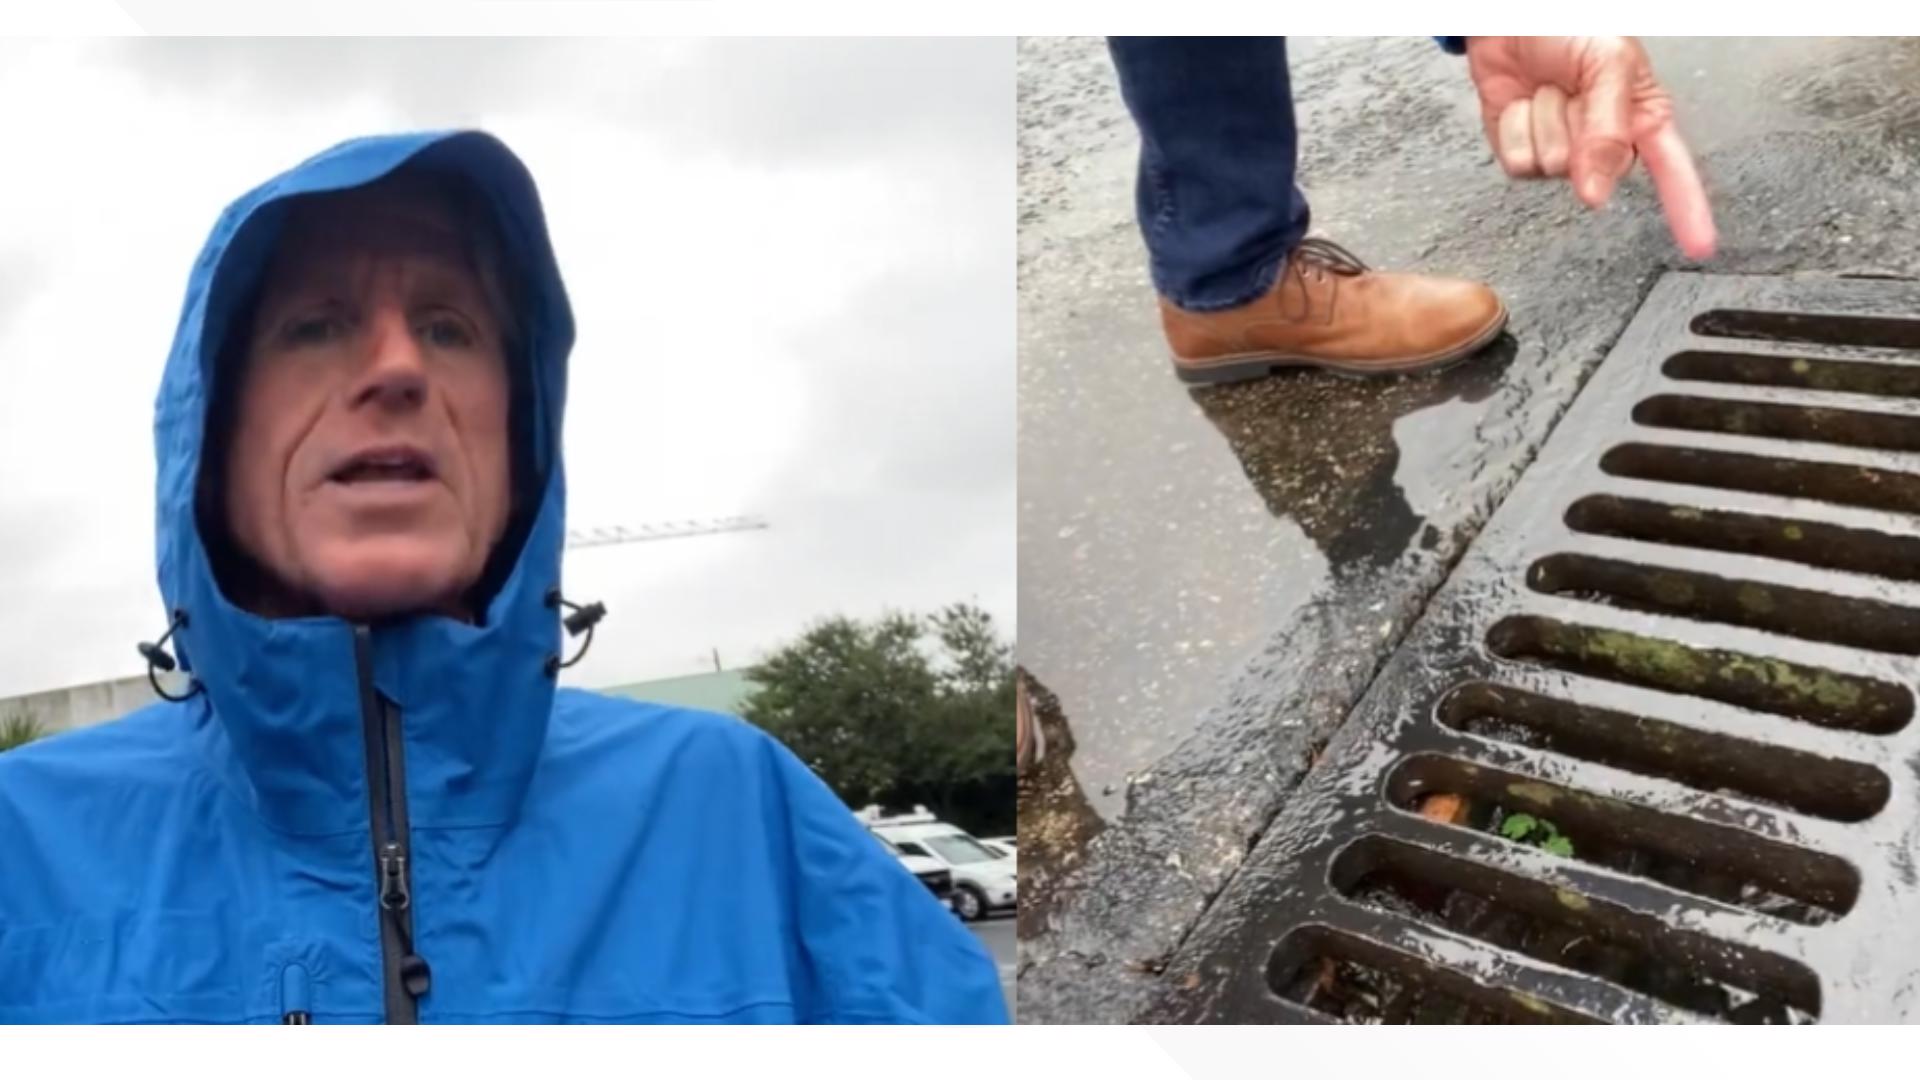 Chief Meteorologist Tim Deegan explains to Meteorologist Makayla Lucero why he watches the storm drains to help gage flooding risks as Hurricane Ian approaches.